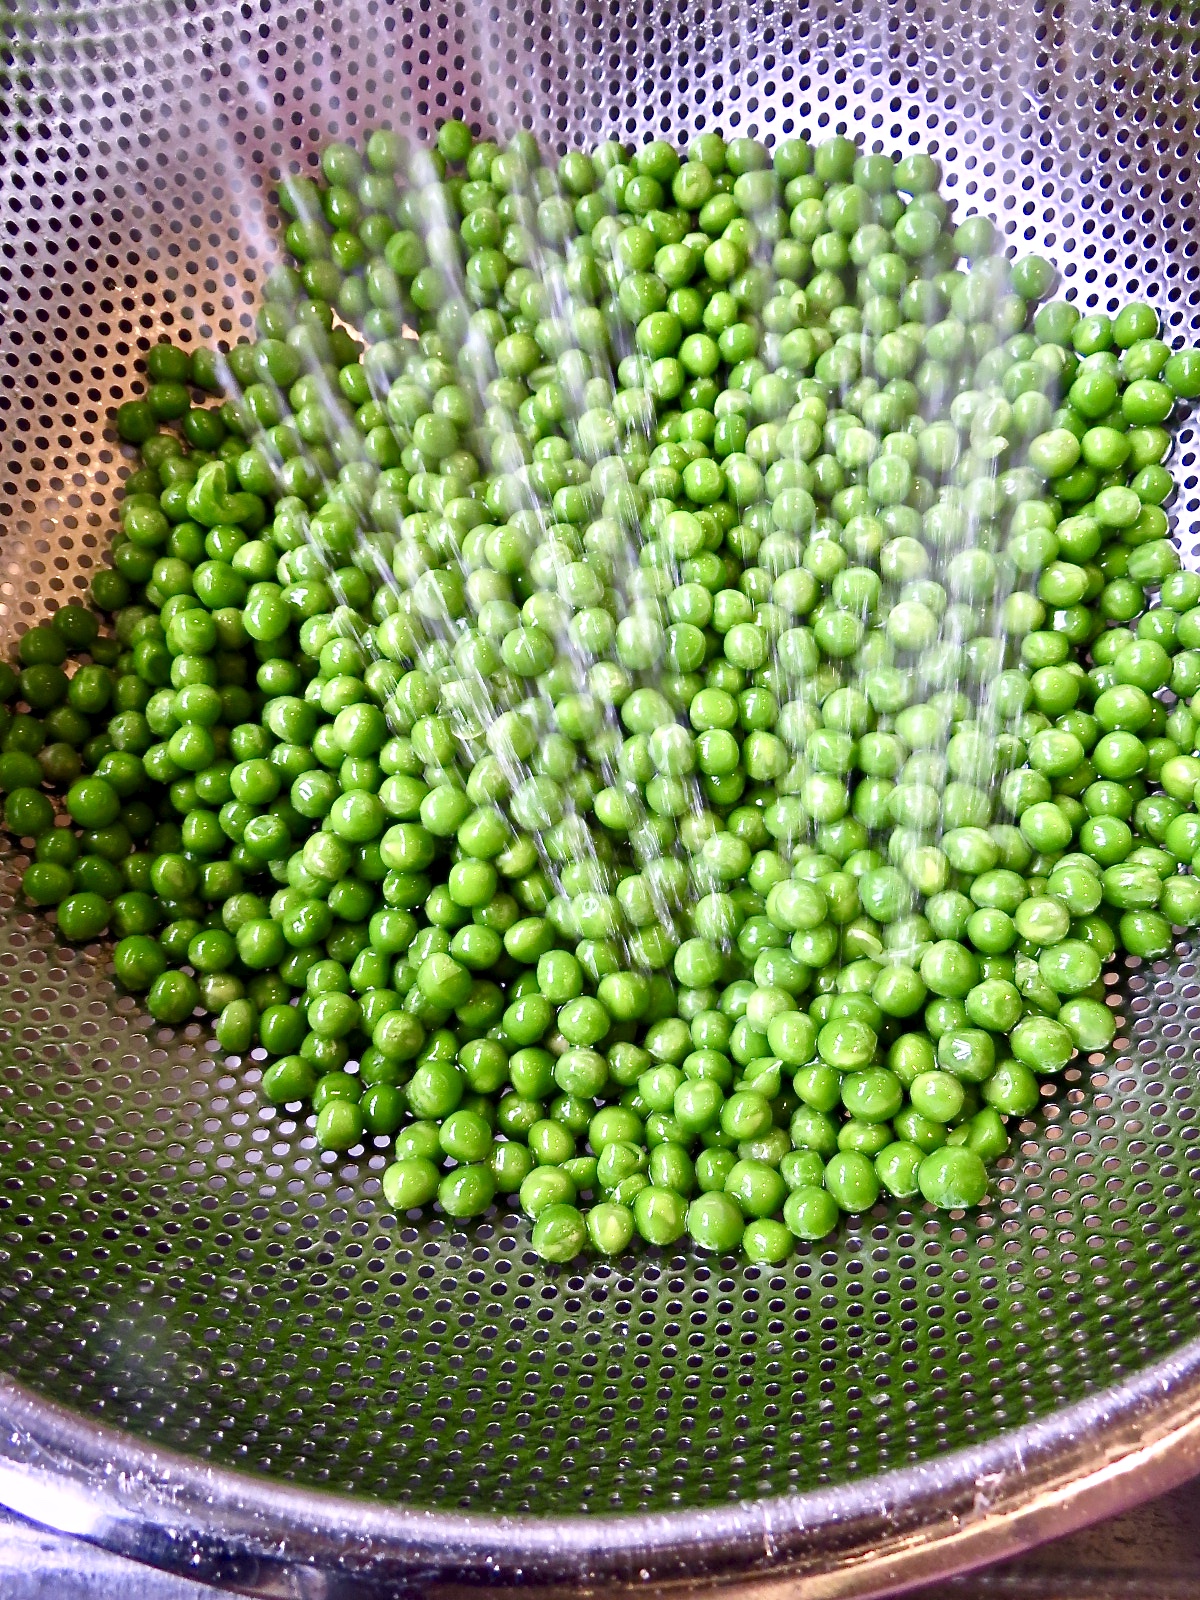 Green Peas being rinsed in a silver colander for Pea Salad, The Forgotten Side Dish.